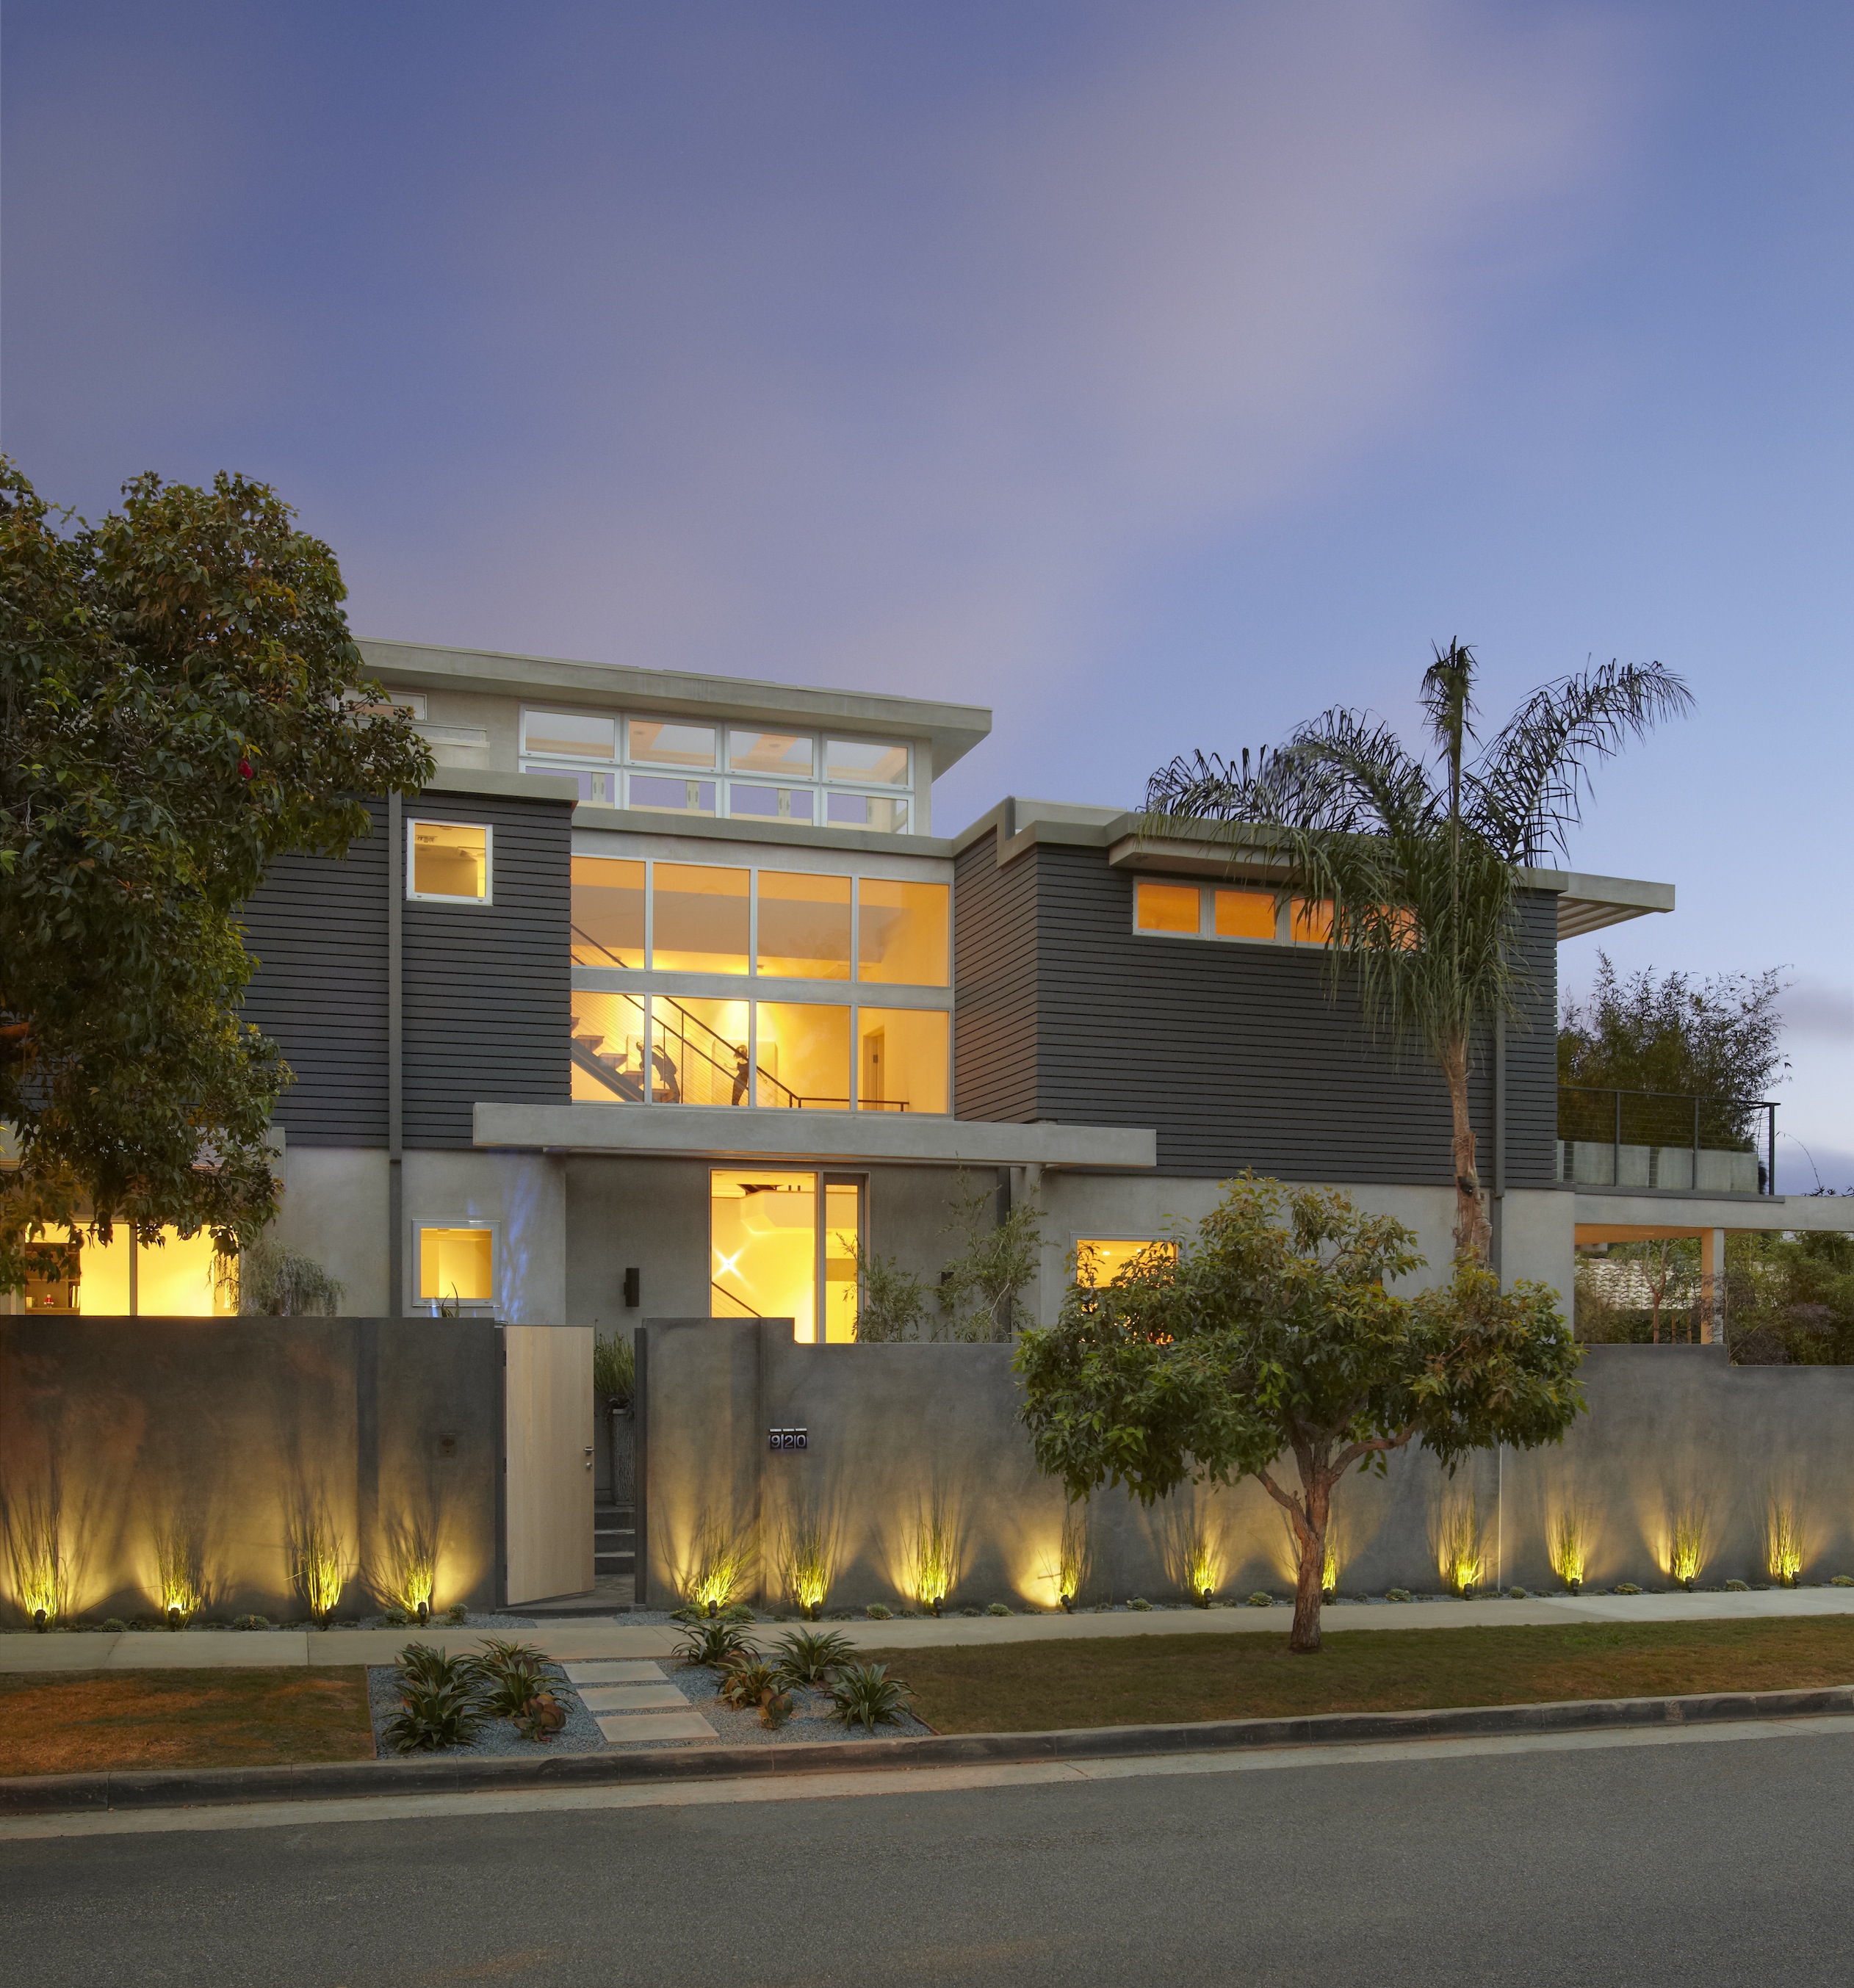 Another home SOLD by Christophe Choo for $4,899,000 in Santa Monica - Representing all cash buyers